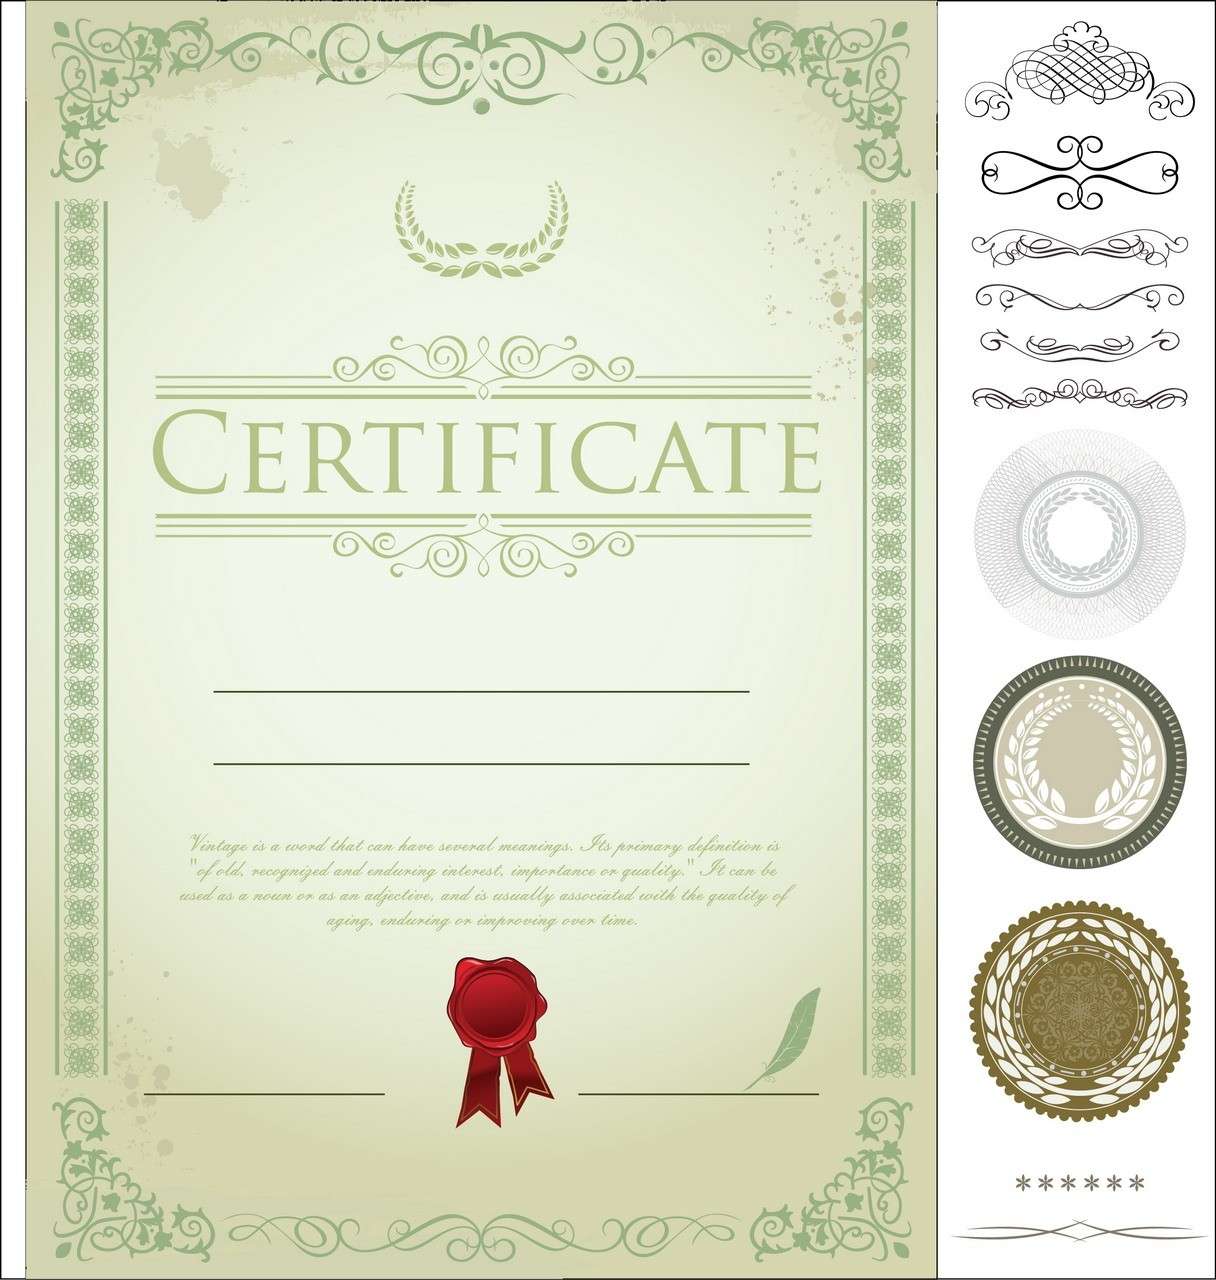 Certificate Template 04 png